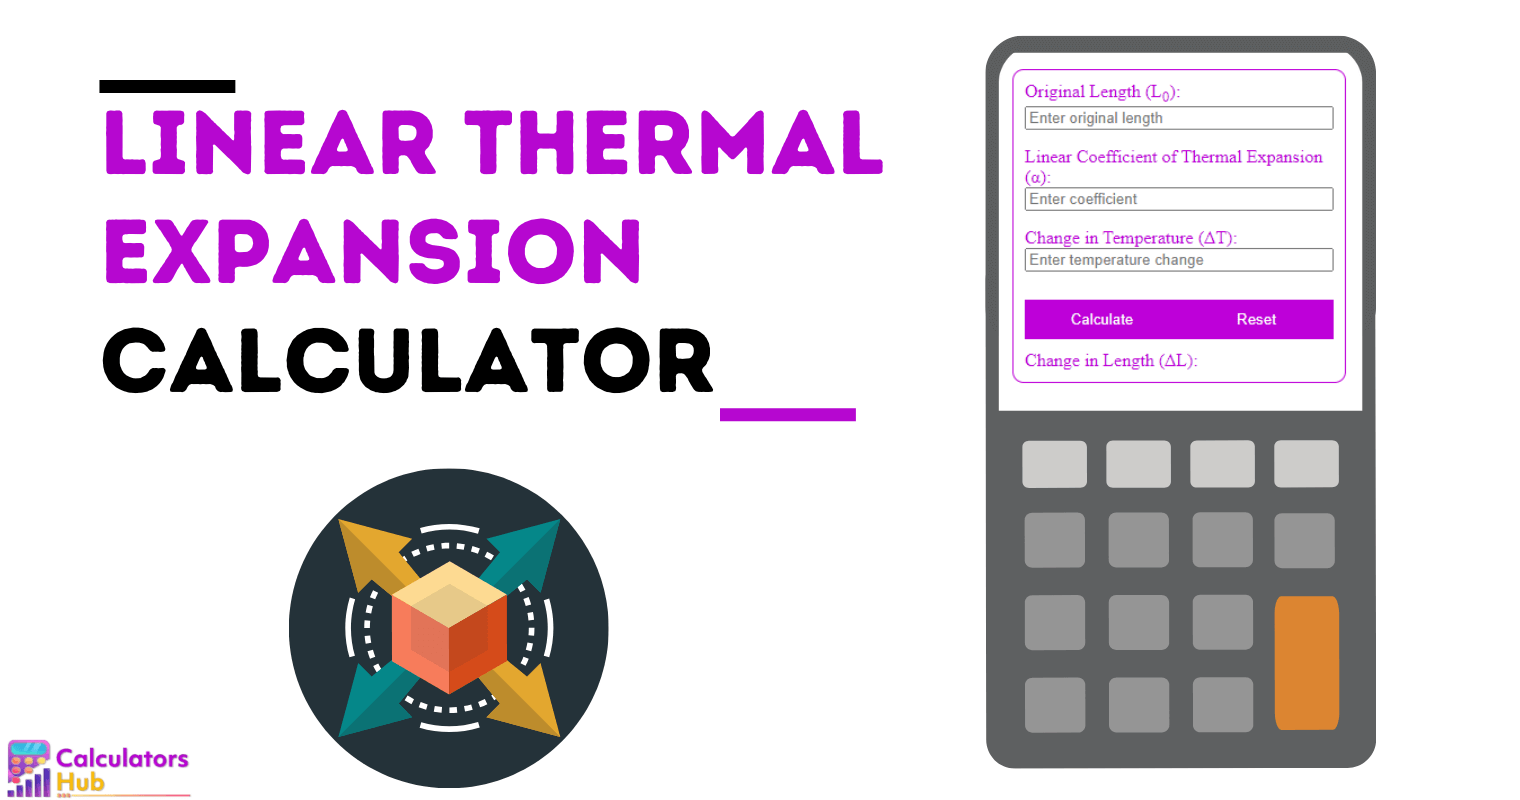 Linear Thermal Expansion Calculator